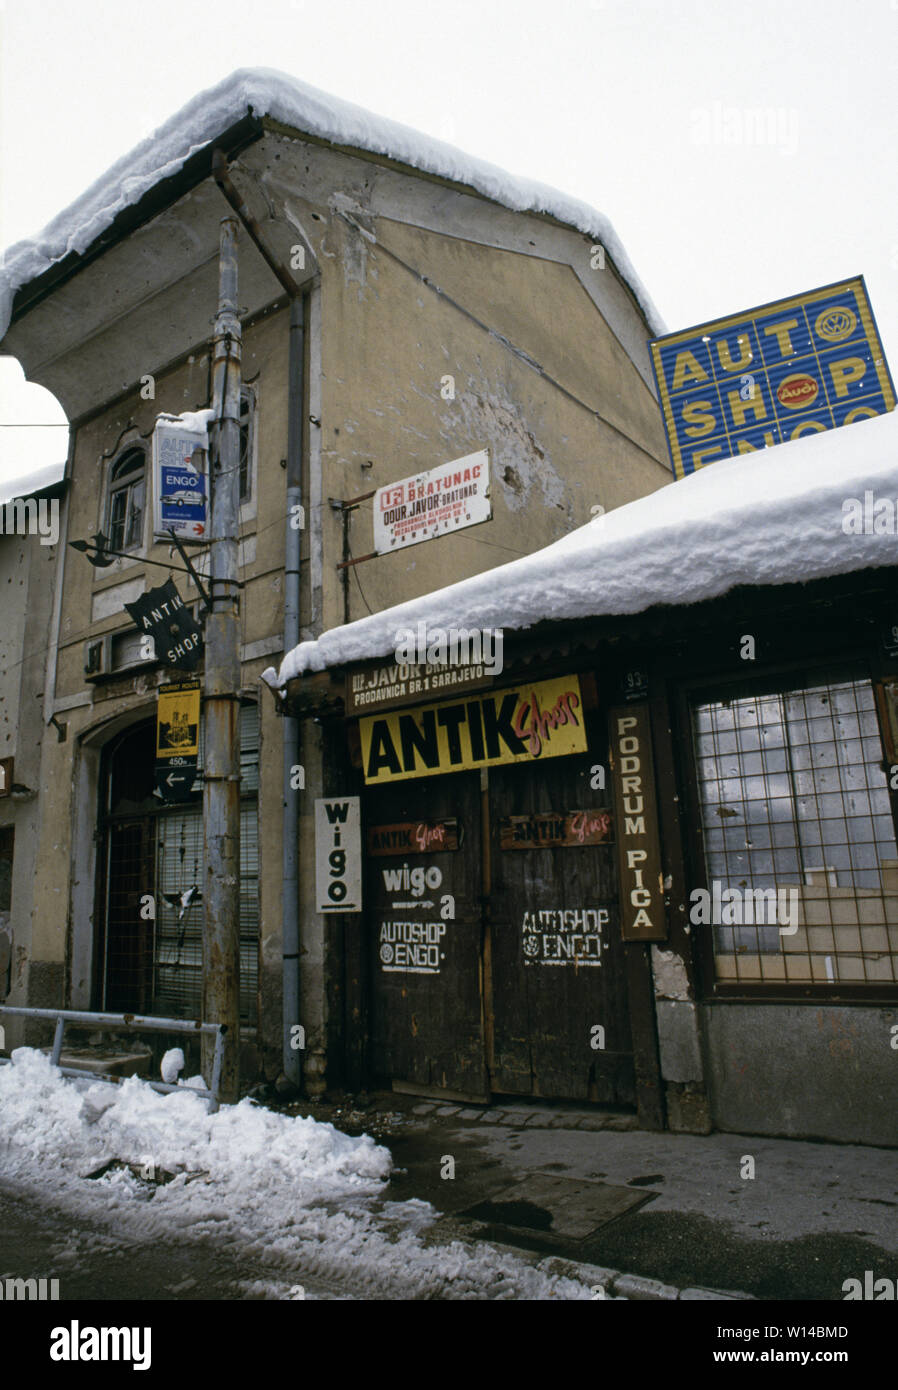 28th March 1993 During the Siege of Sarajevo: a shut-down antiques store at 93 Marsala Tita Street in the Baščaršija area. On a gable wall above it is the typical scar of a direct hit from a mortar or artillery shell. Stock Photo